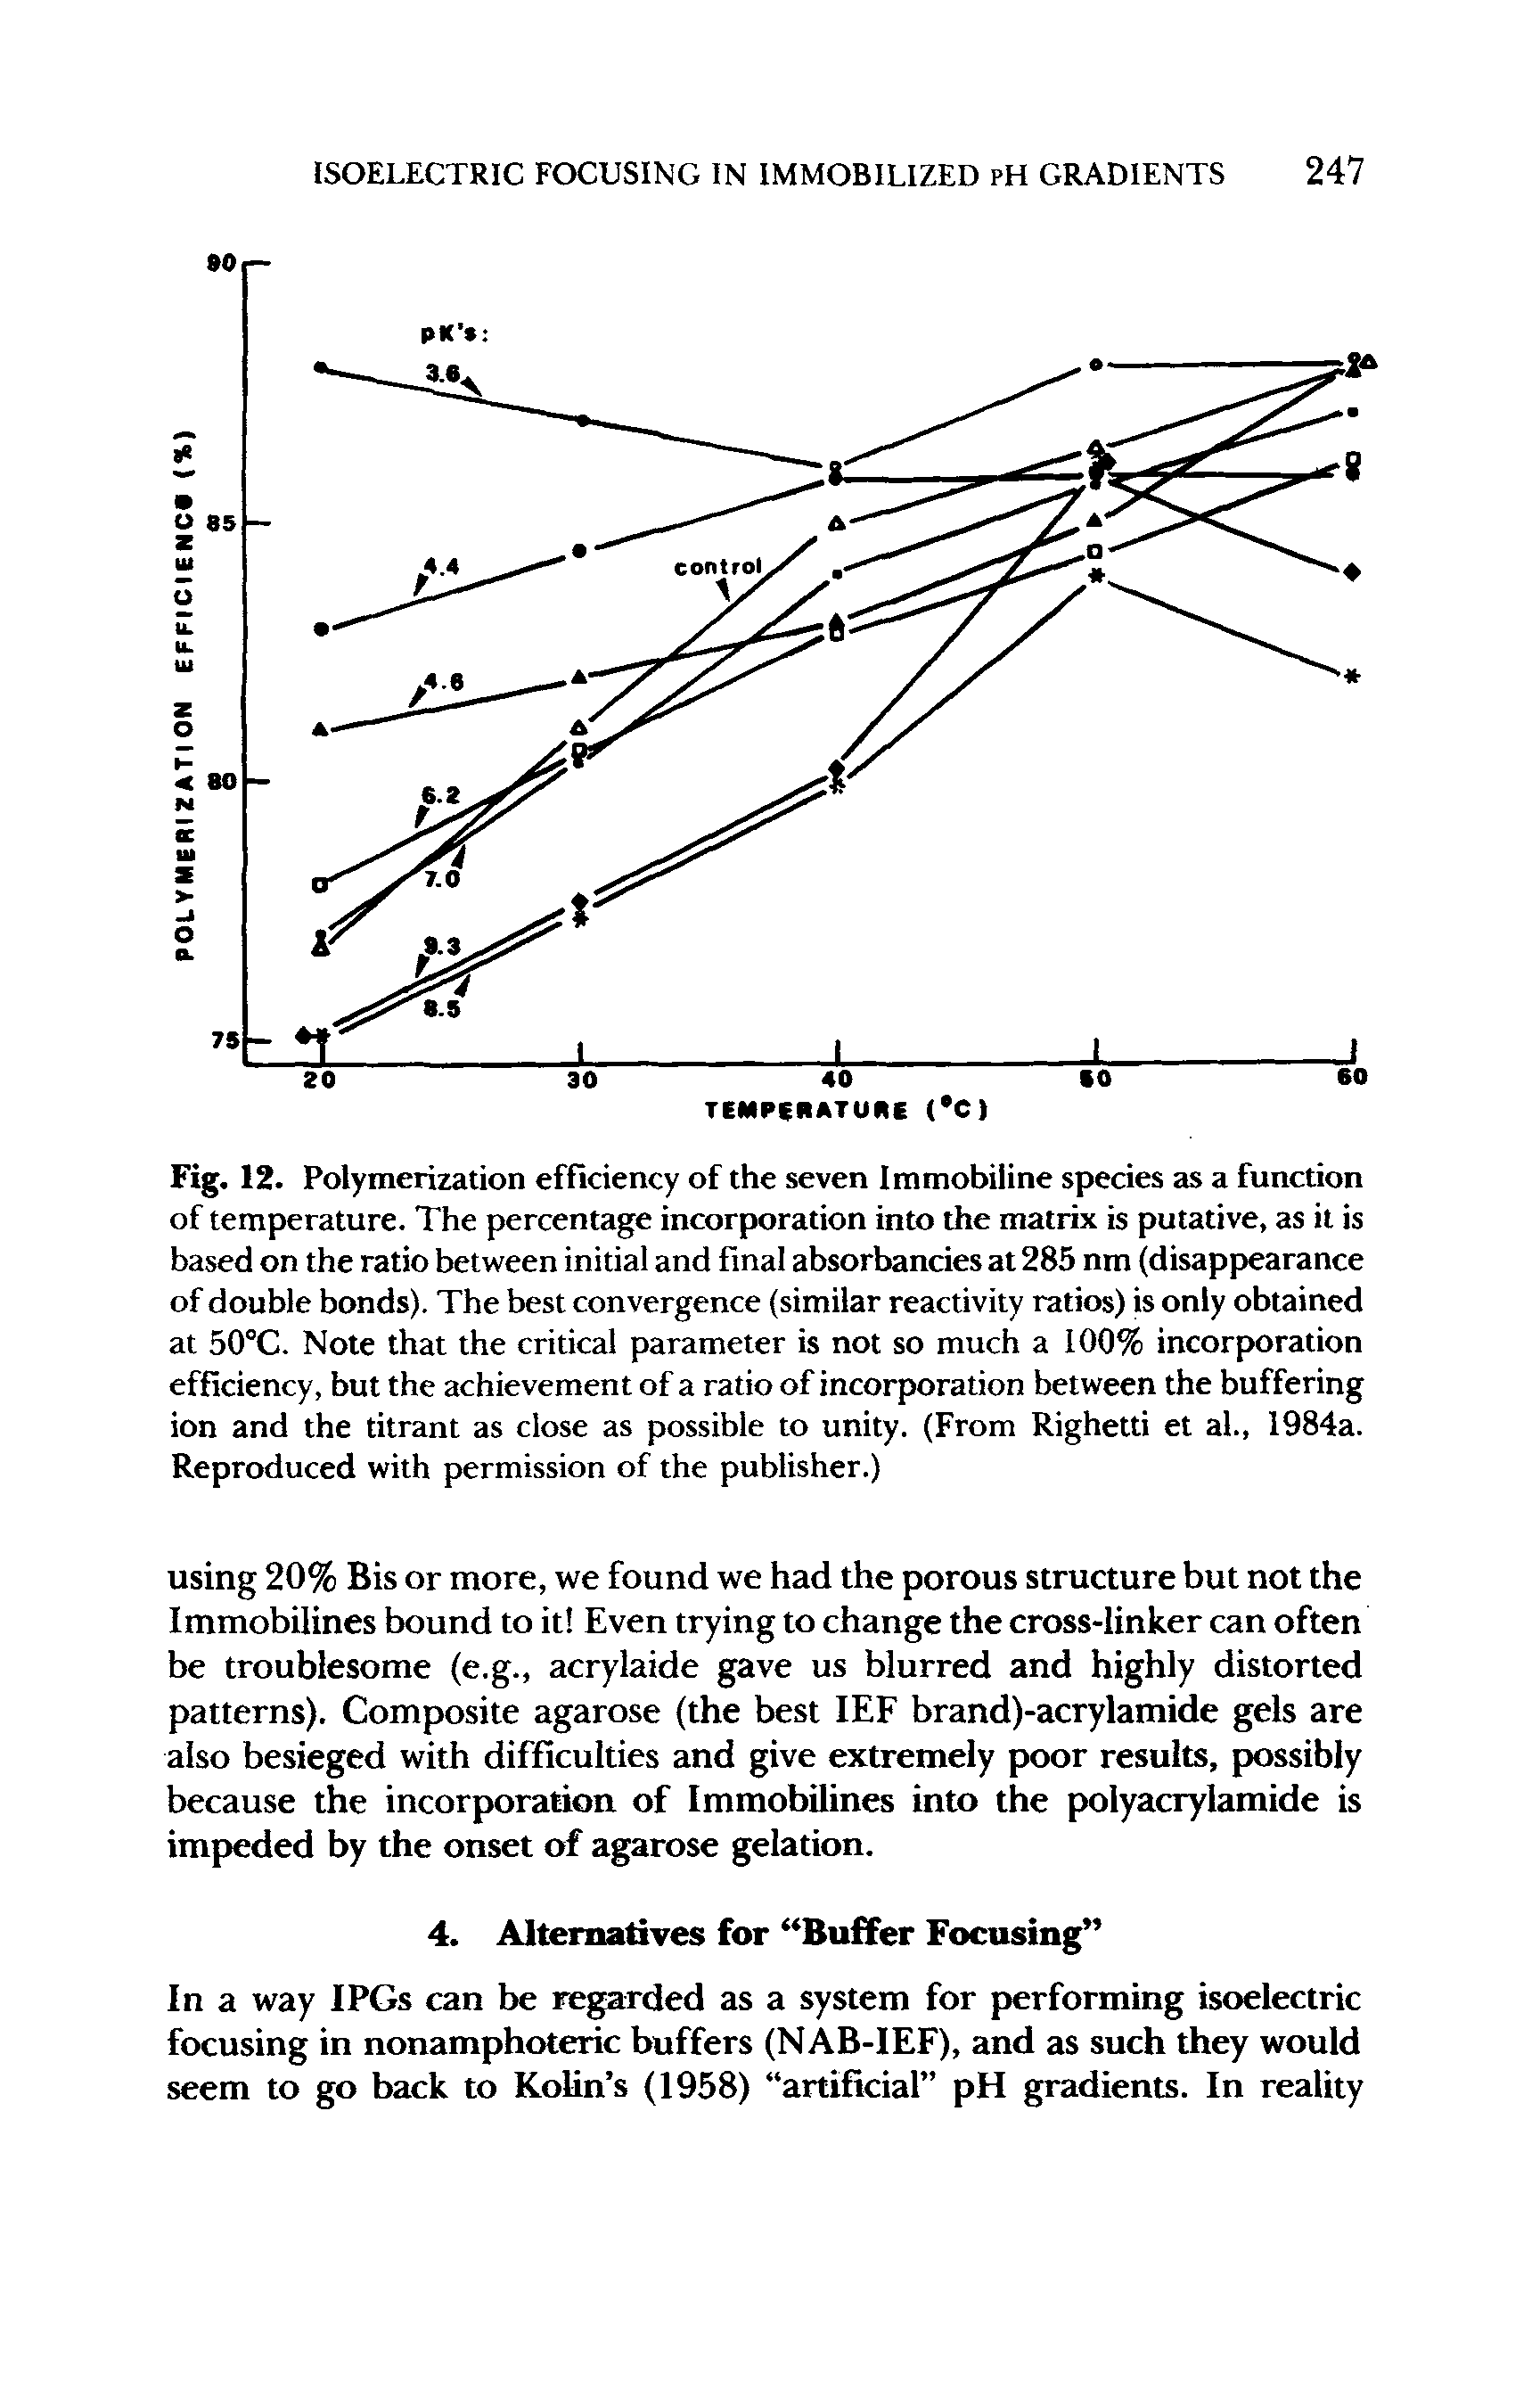 Fig. 12. Polymerization efficiency of the seven Immobiline species as a function of temperature. The percentage incorporation into the matrix is putative, as it is based on the ratio between initial and final absorbancies at 285 nm (disappearance of double bonds). The best convergence (similar reactivity ratios) is only obtained at 50°C. Note that the critical parameter is not so much a 100% incorporation efficiency, but the achievement of a ratio of incorporation between the buffering ion and the titrant as close as possible to unity. (From Righetti et al., 1984a. Reproduced with permission of the publisher.)...